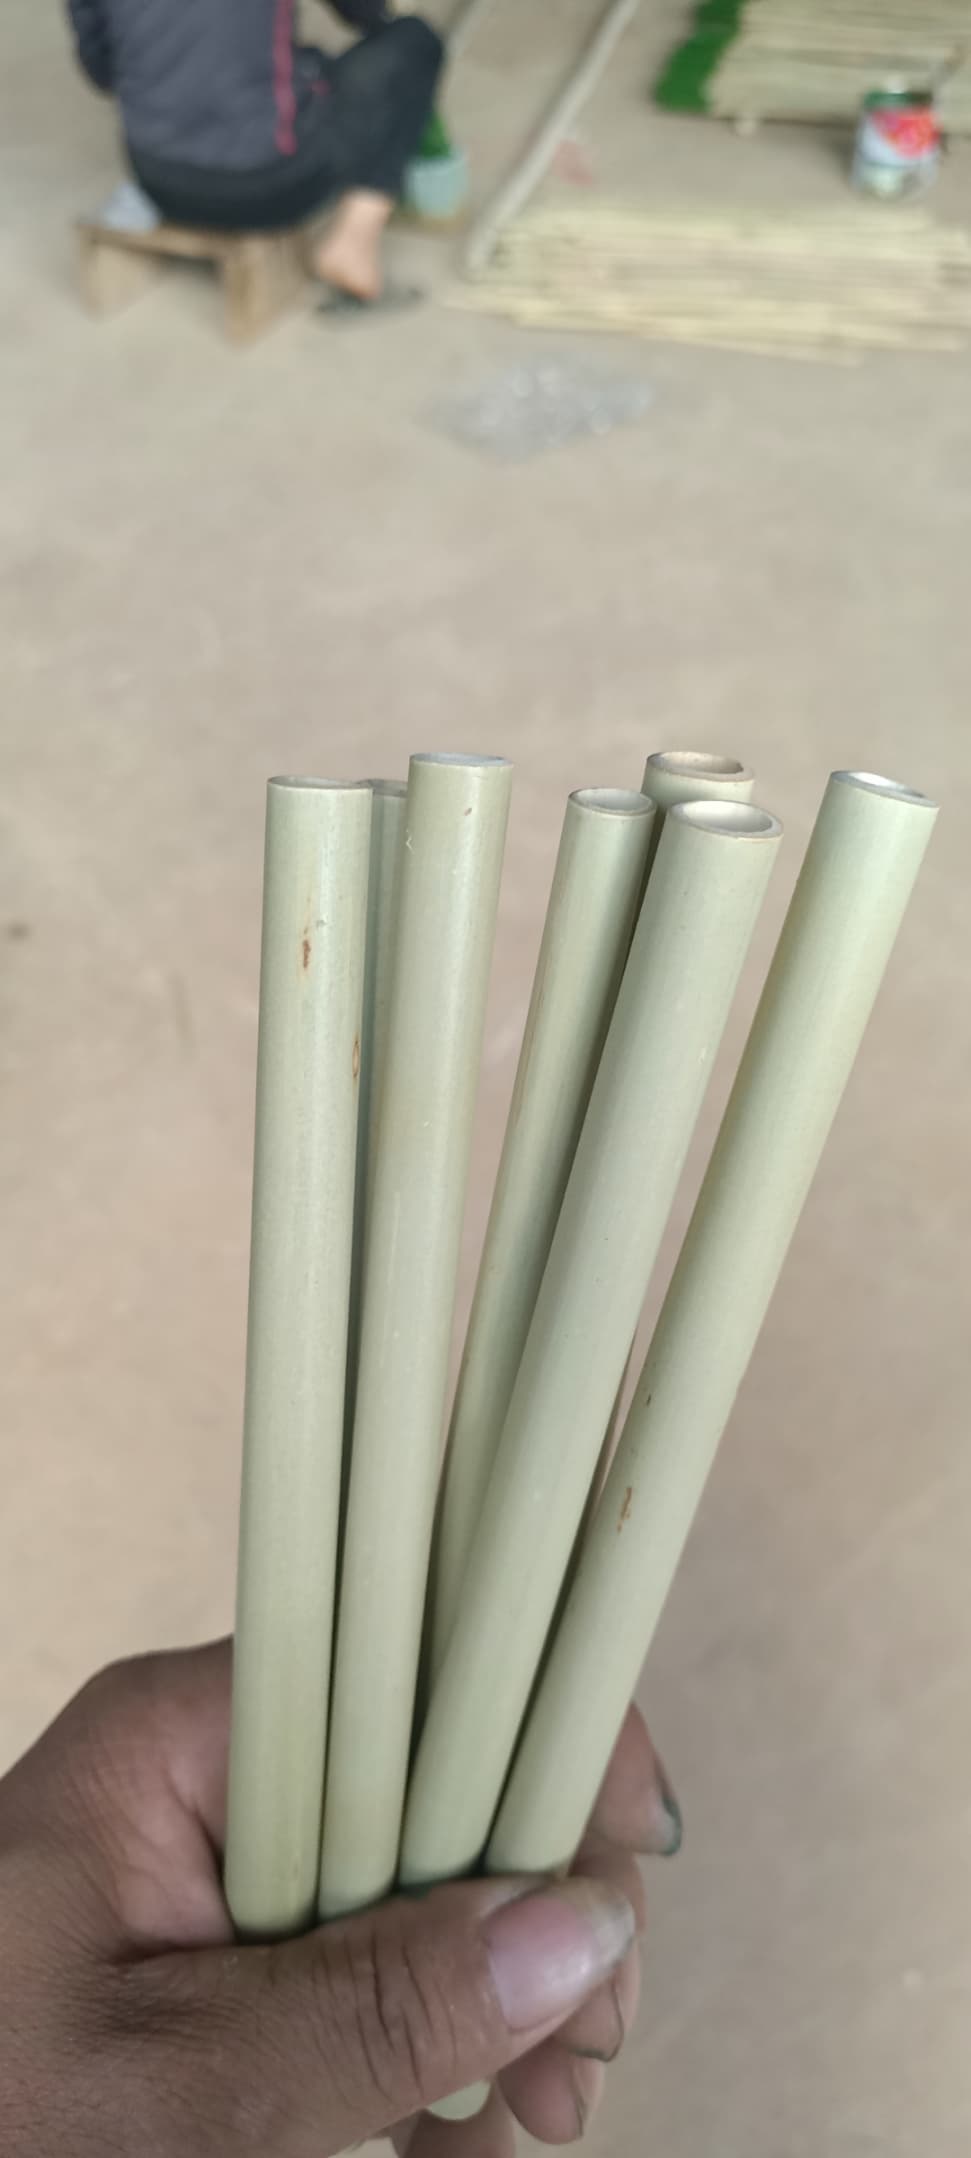 Bamboo drinking straws reusable natural bright green color cheap price from Vietnam factory